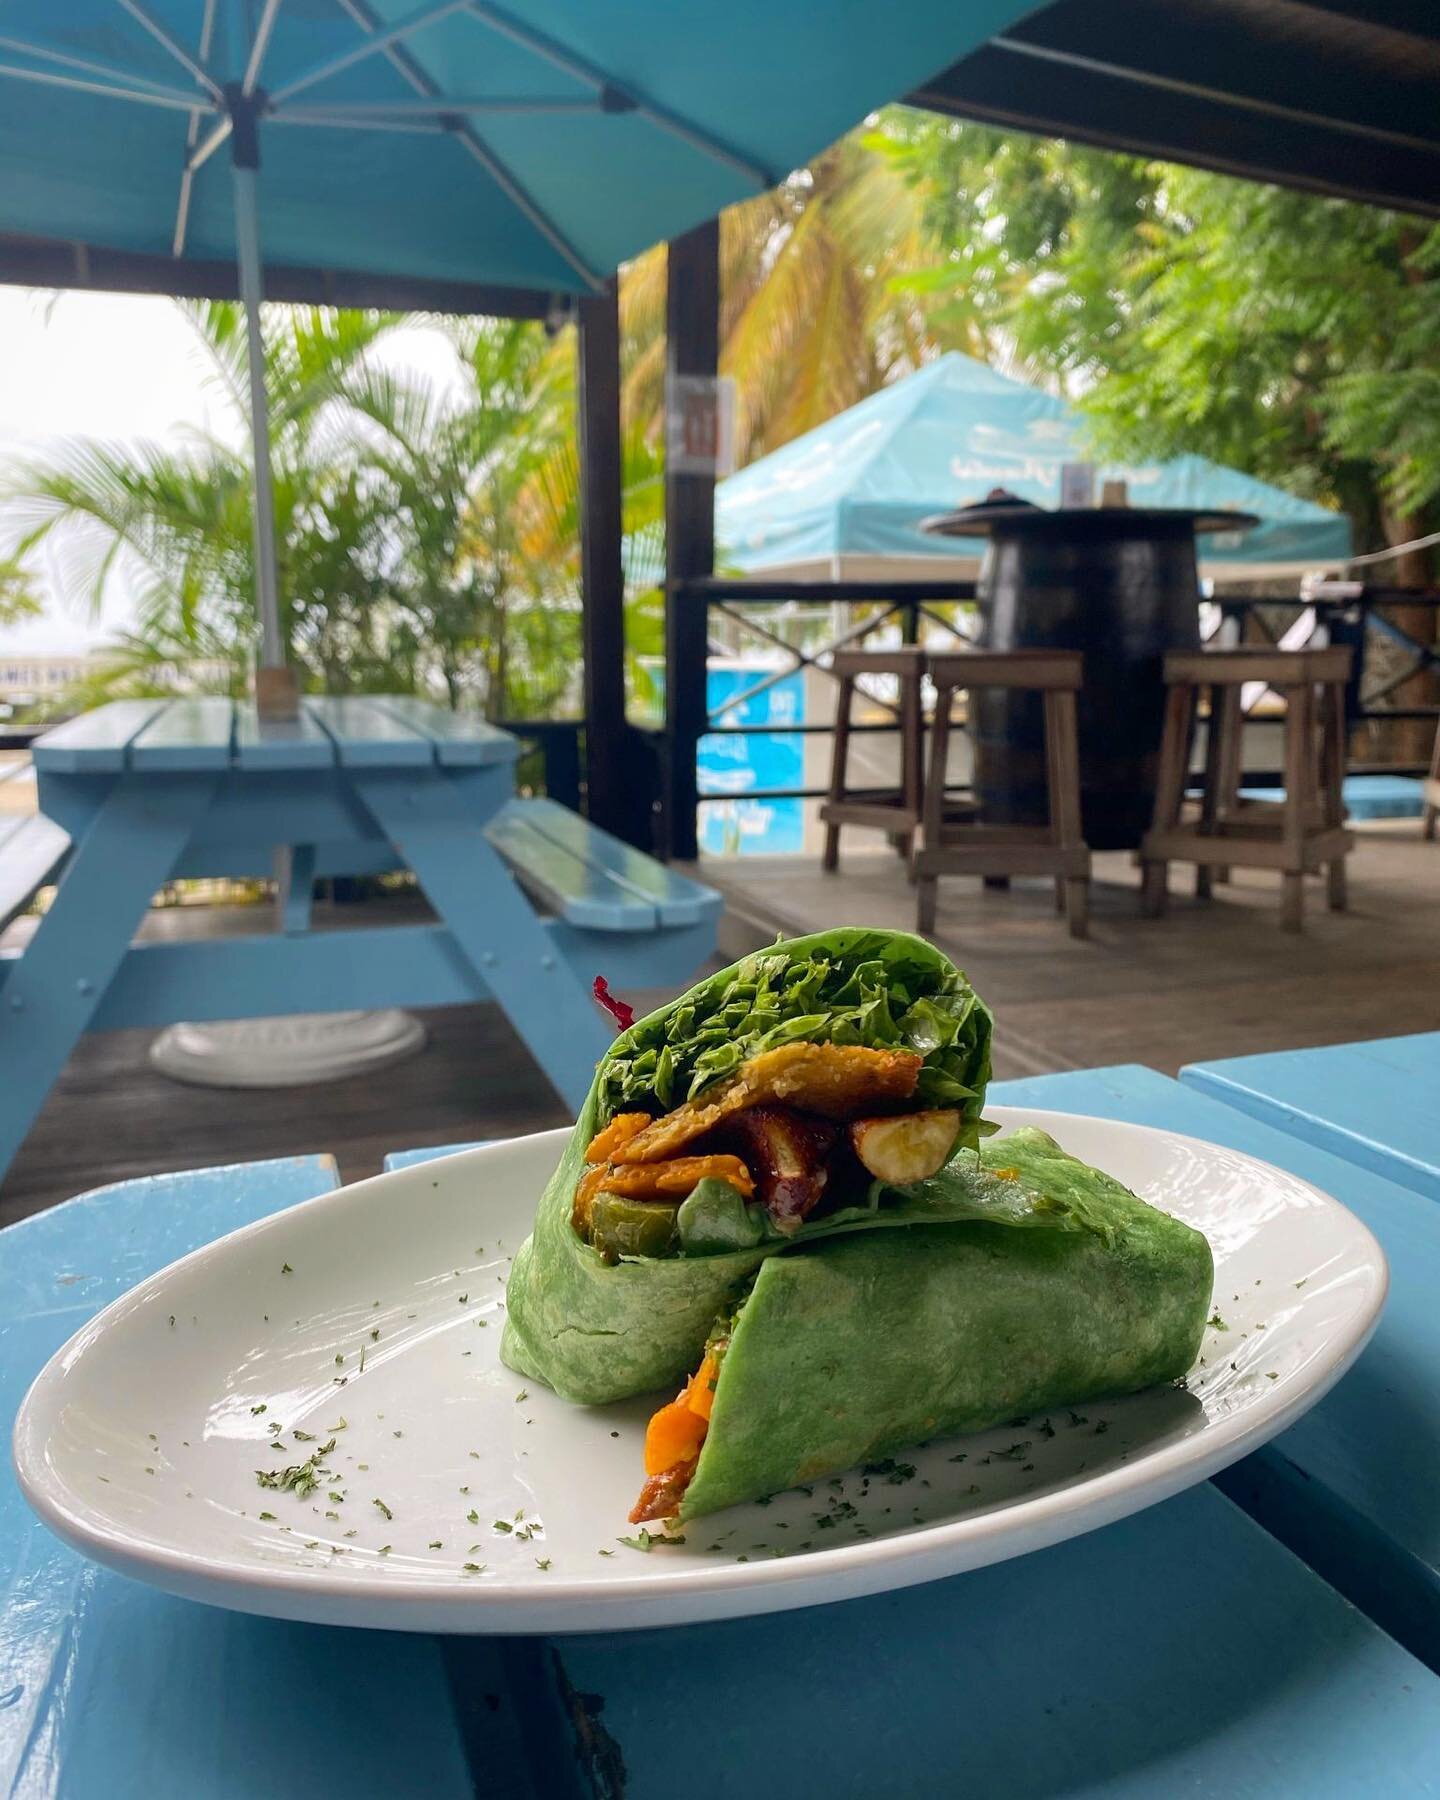 NEW veggie wrap! 🌿
.
Including grilled seasonal vegetables &amp; falafel! A must try for our veggie lovers out there 💚
.
#umbrellasbeachbar #EatDrinkLime #veggie #veggiefood #veggiewrap #veggielovers #bar #beachbar #grenada #food #lunch #beachside